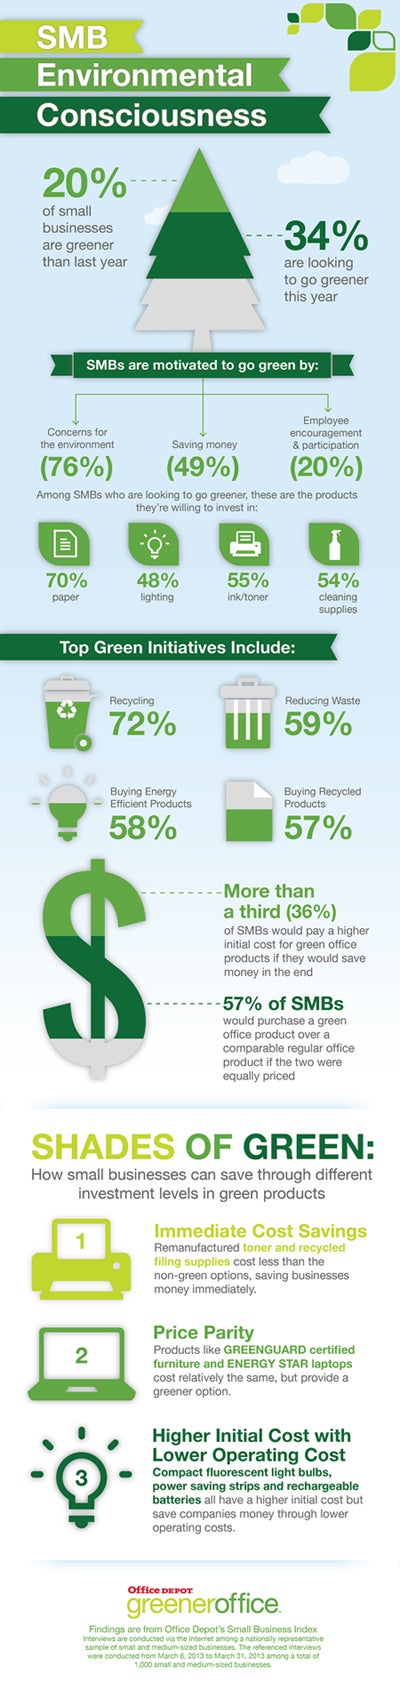 Office Depot Green Infographic 2013